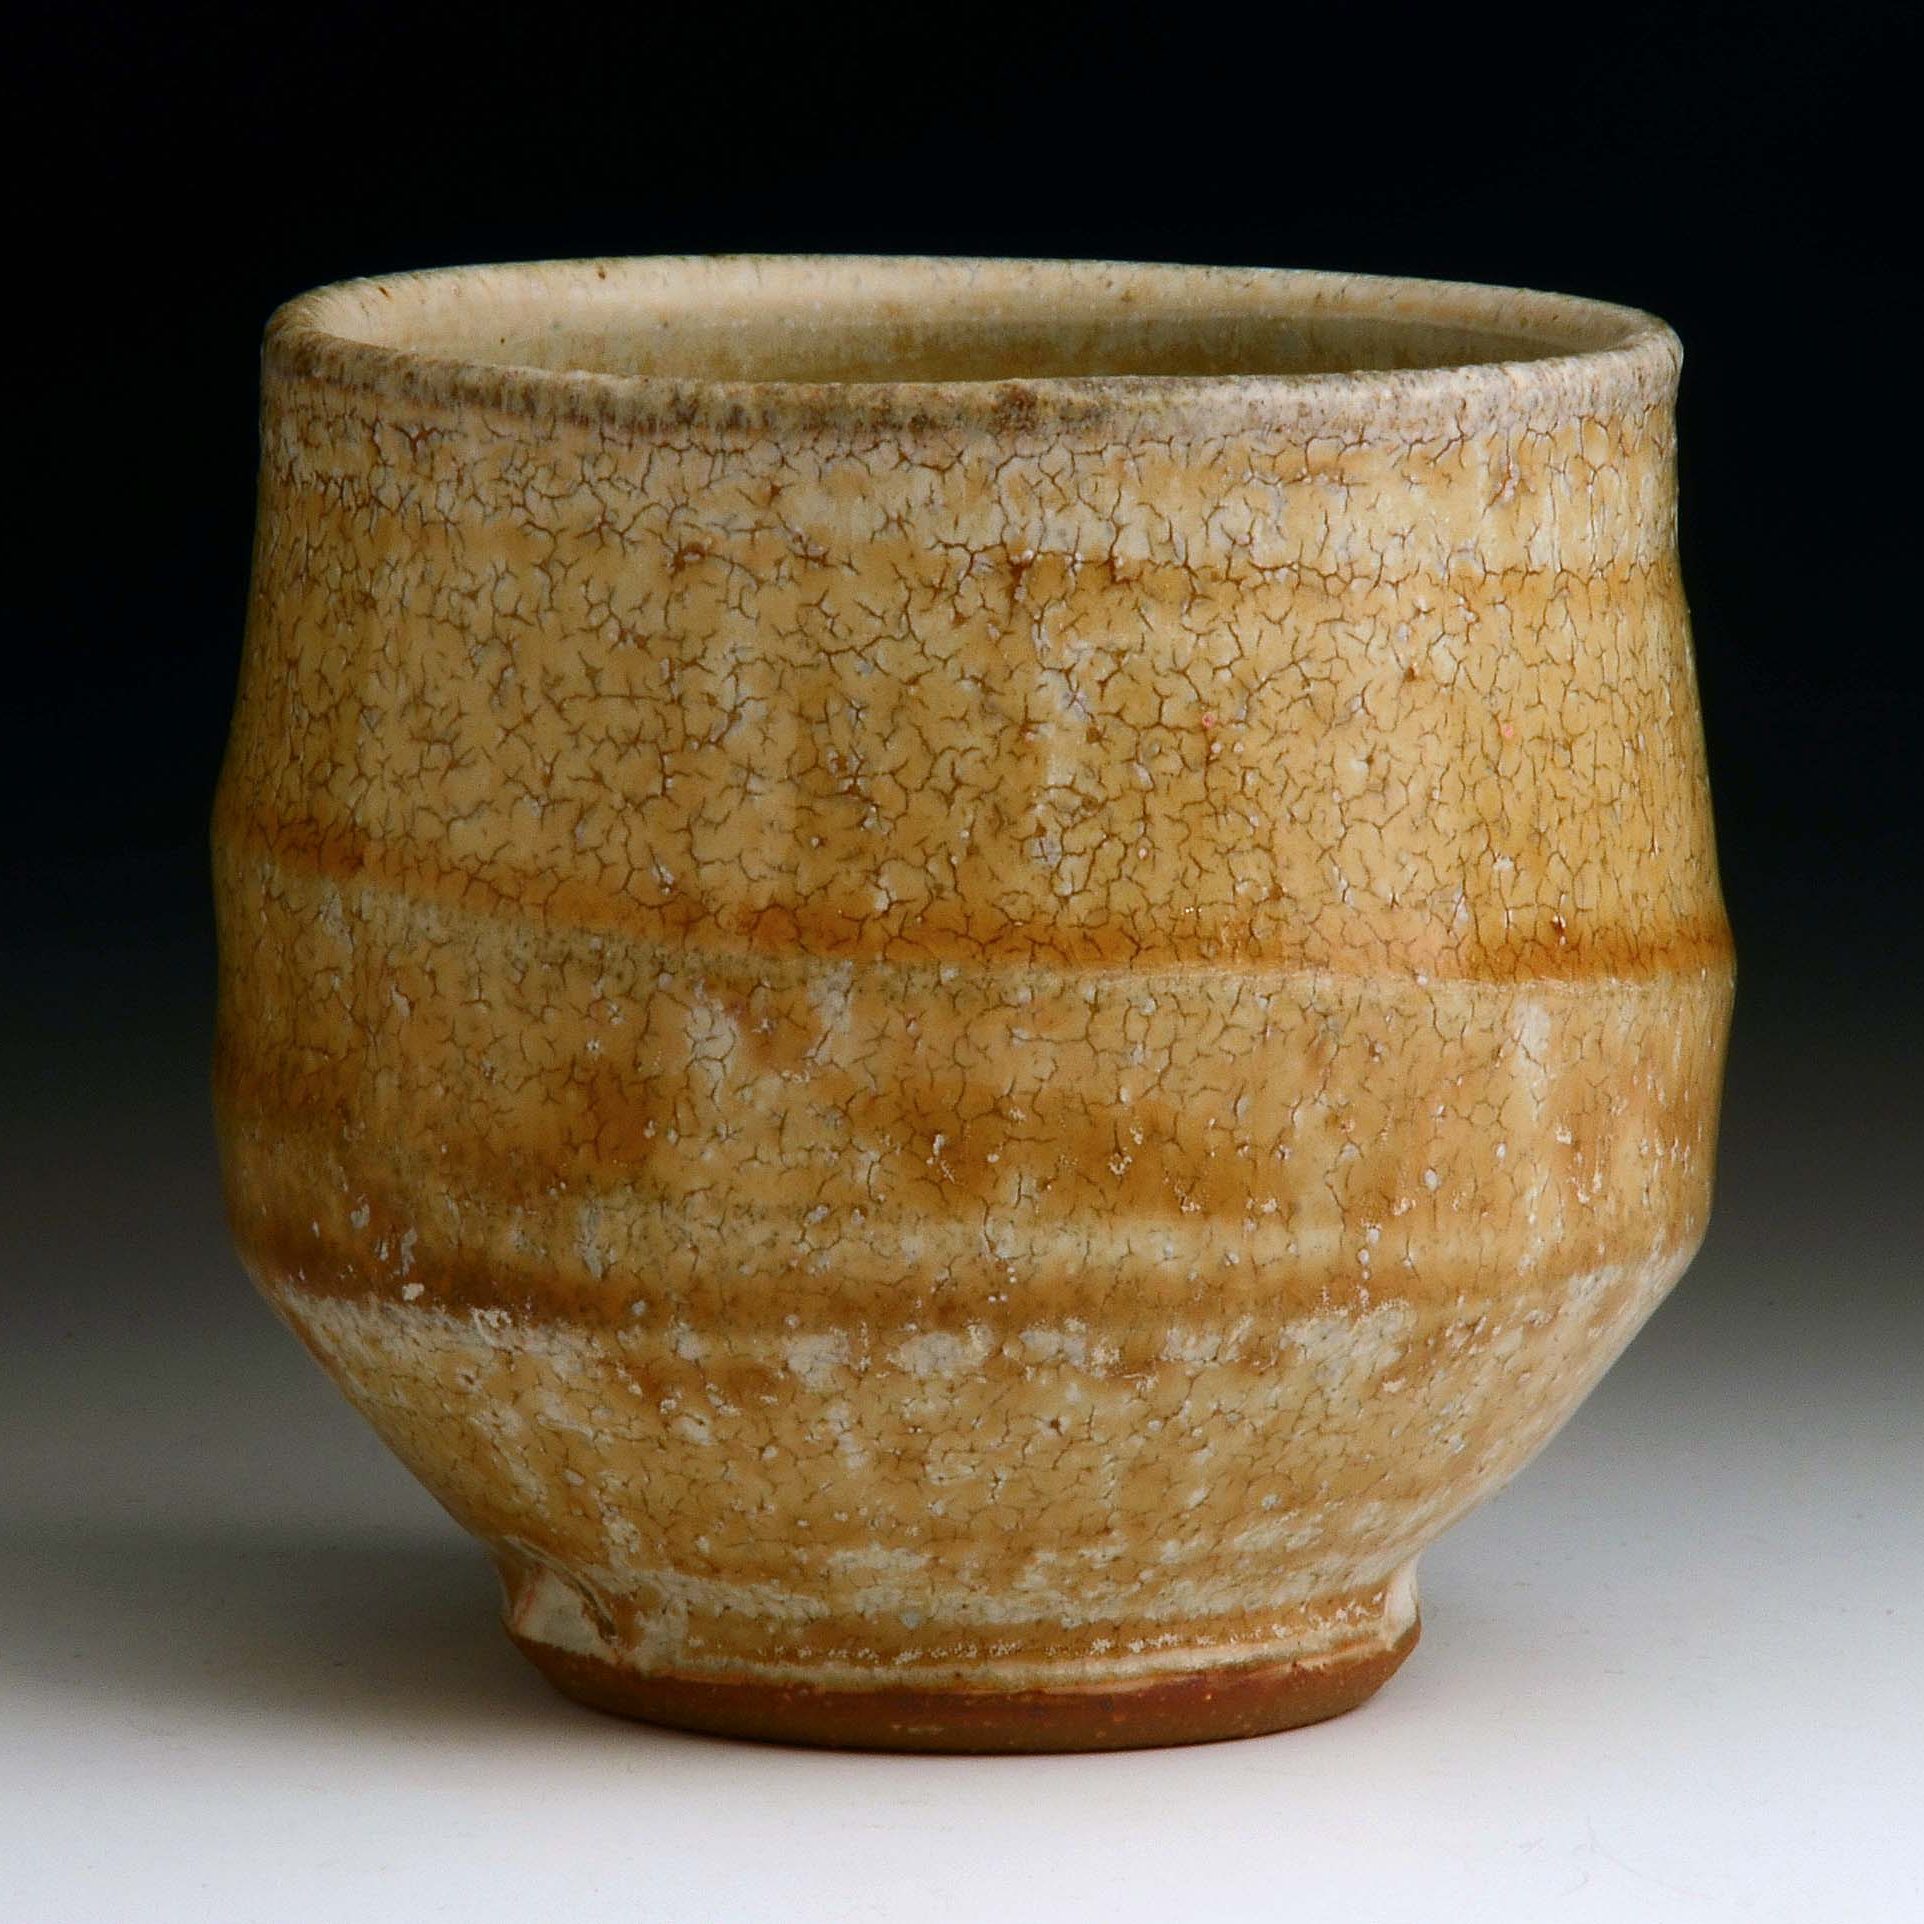 [4]
Rick Hintze, Yunomi, 2020, stoneware, white crackle slip, and wood ash glaze, 3.75x4x4 inches, collection of the artist